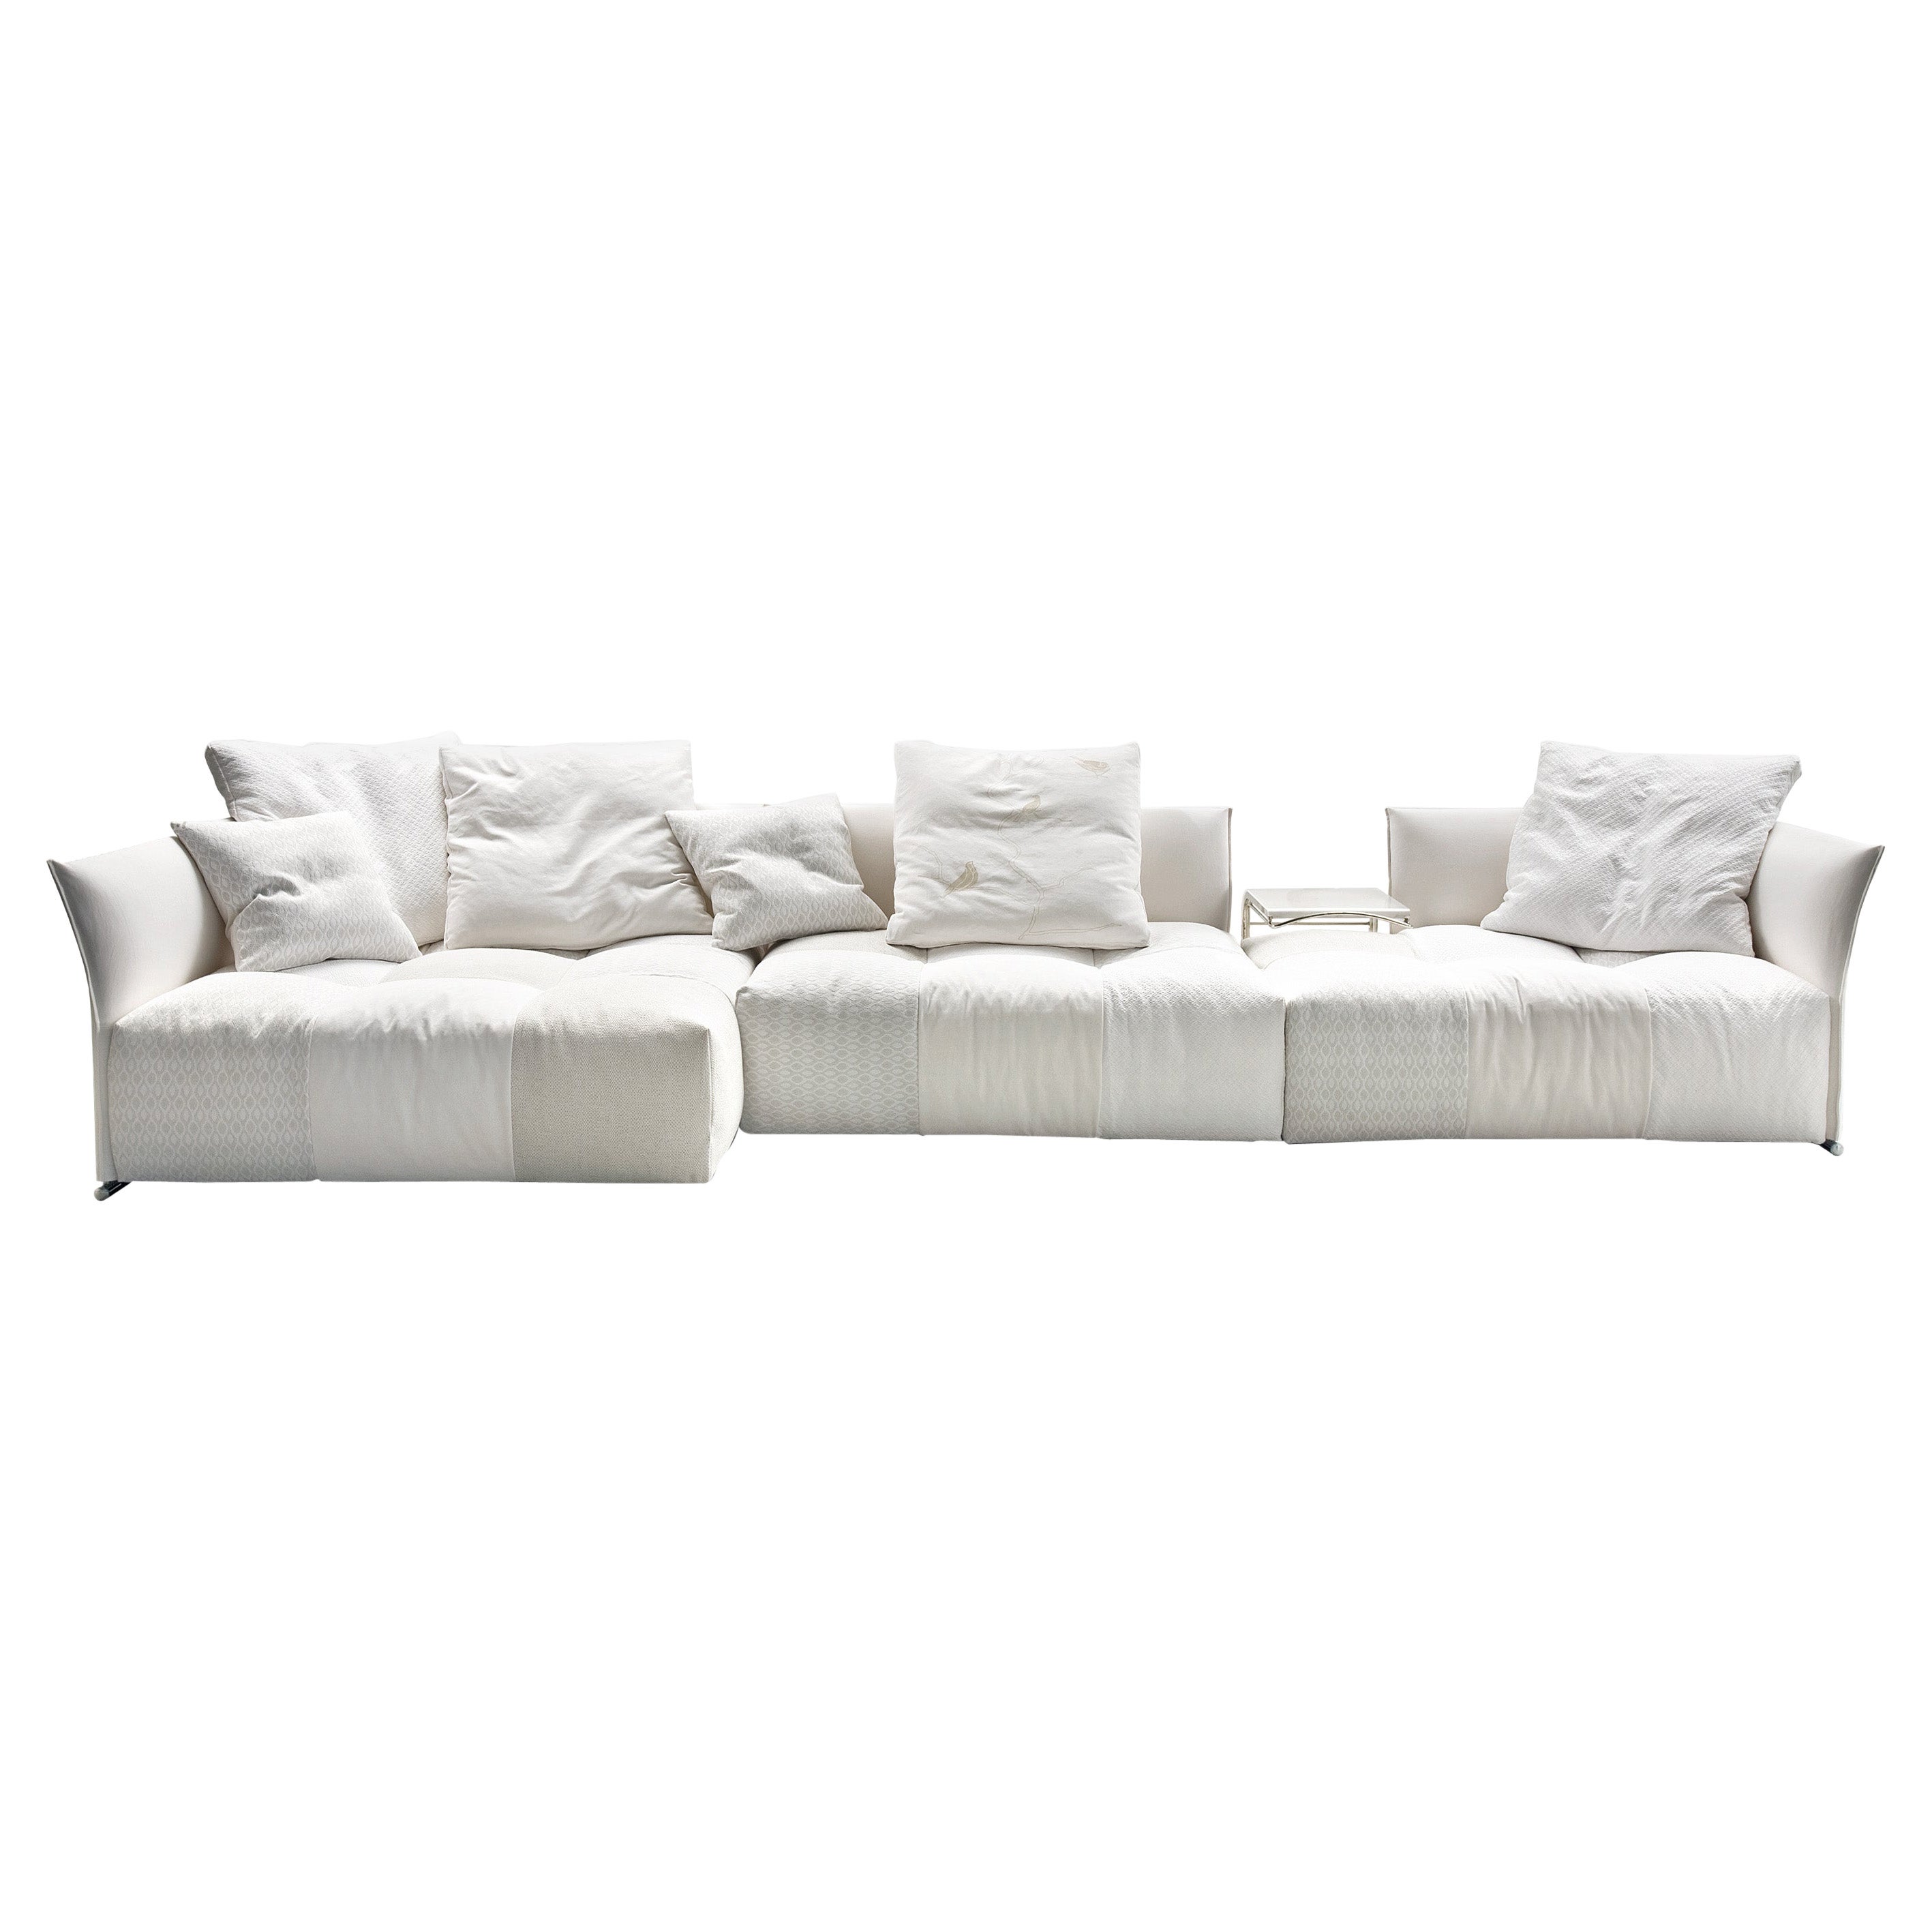 Pixel Sectional Sofa in Patchwork Upholstery by Sergio Bicego